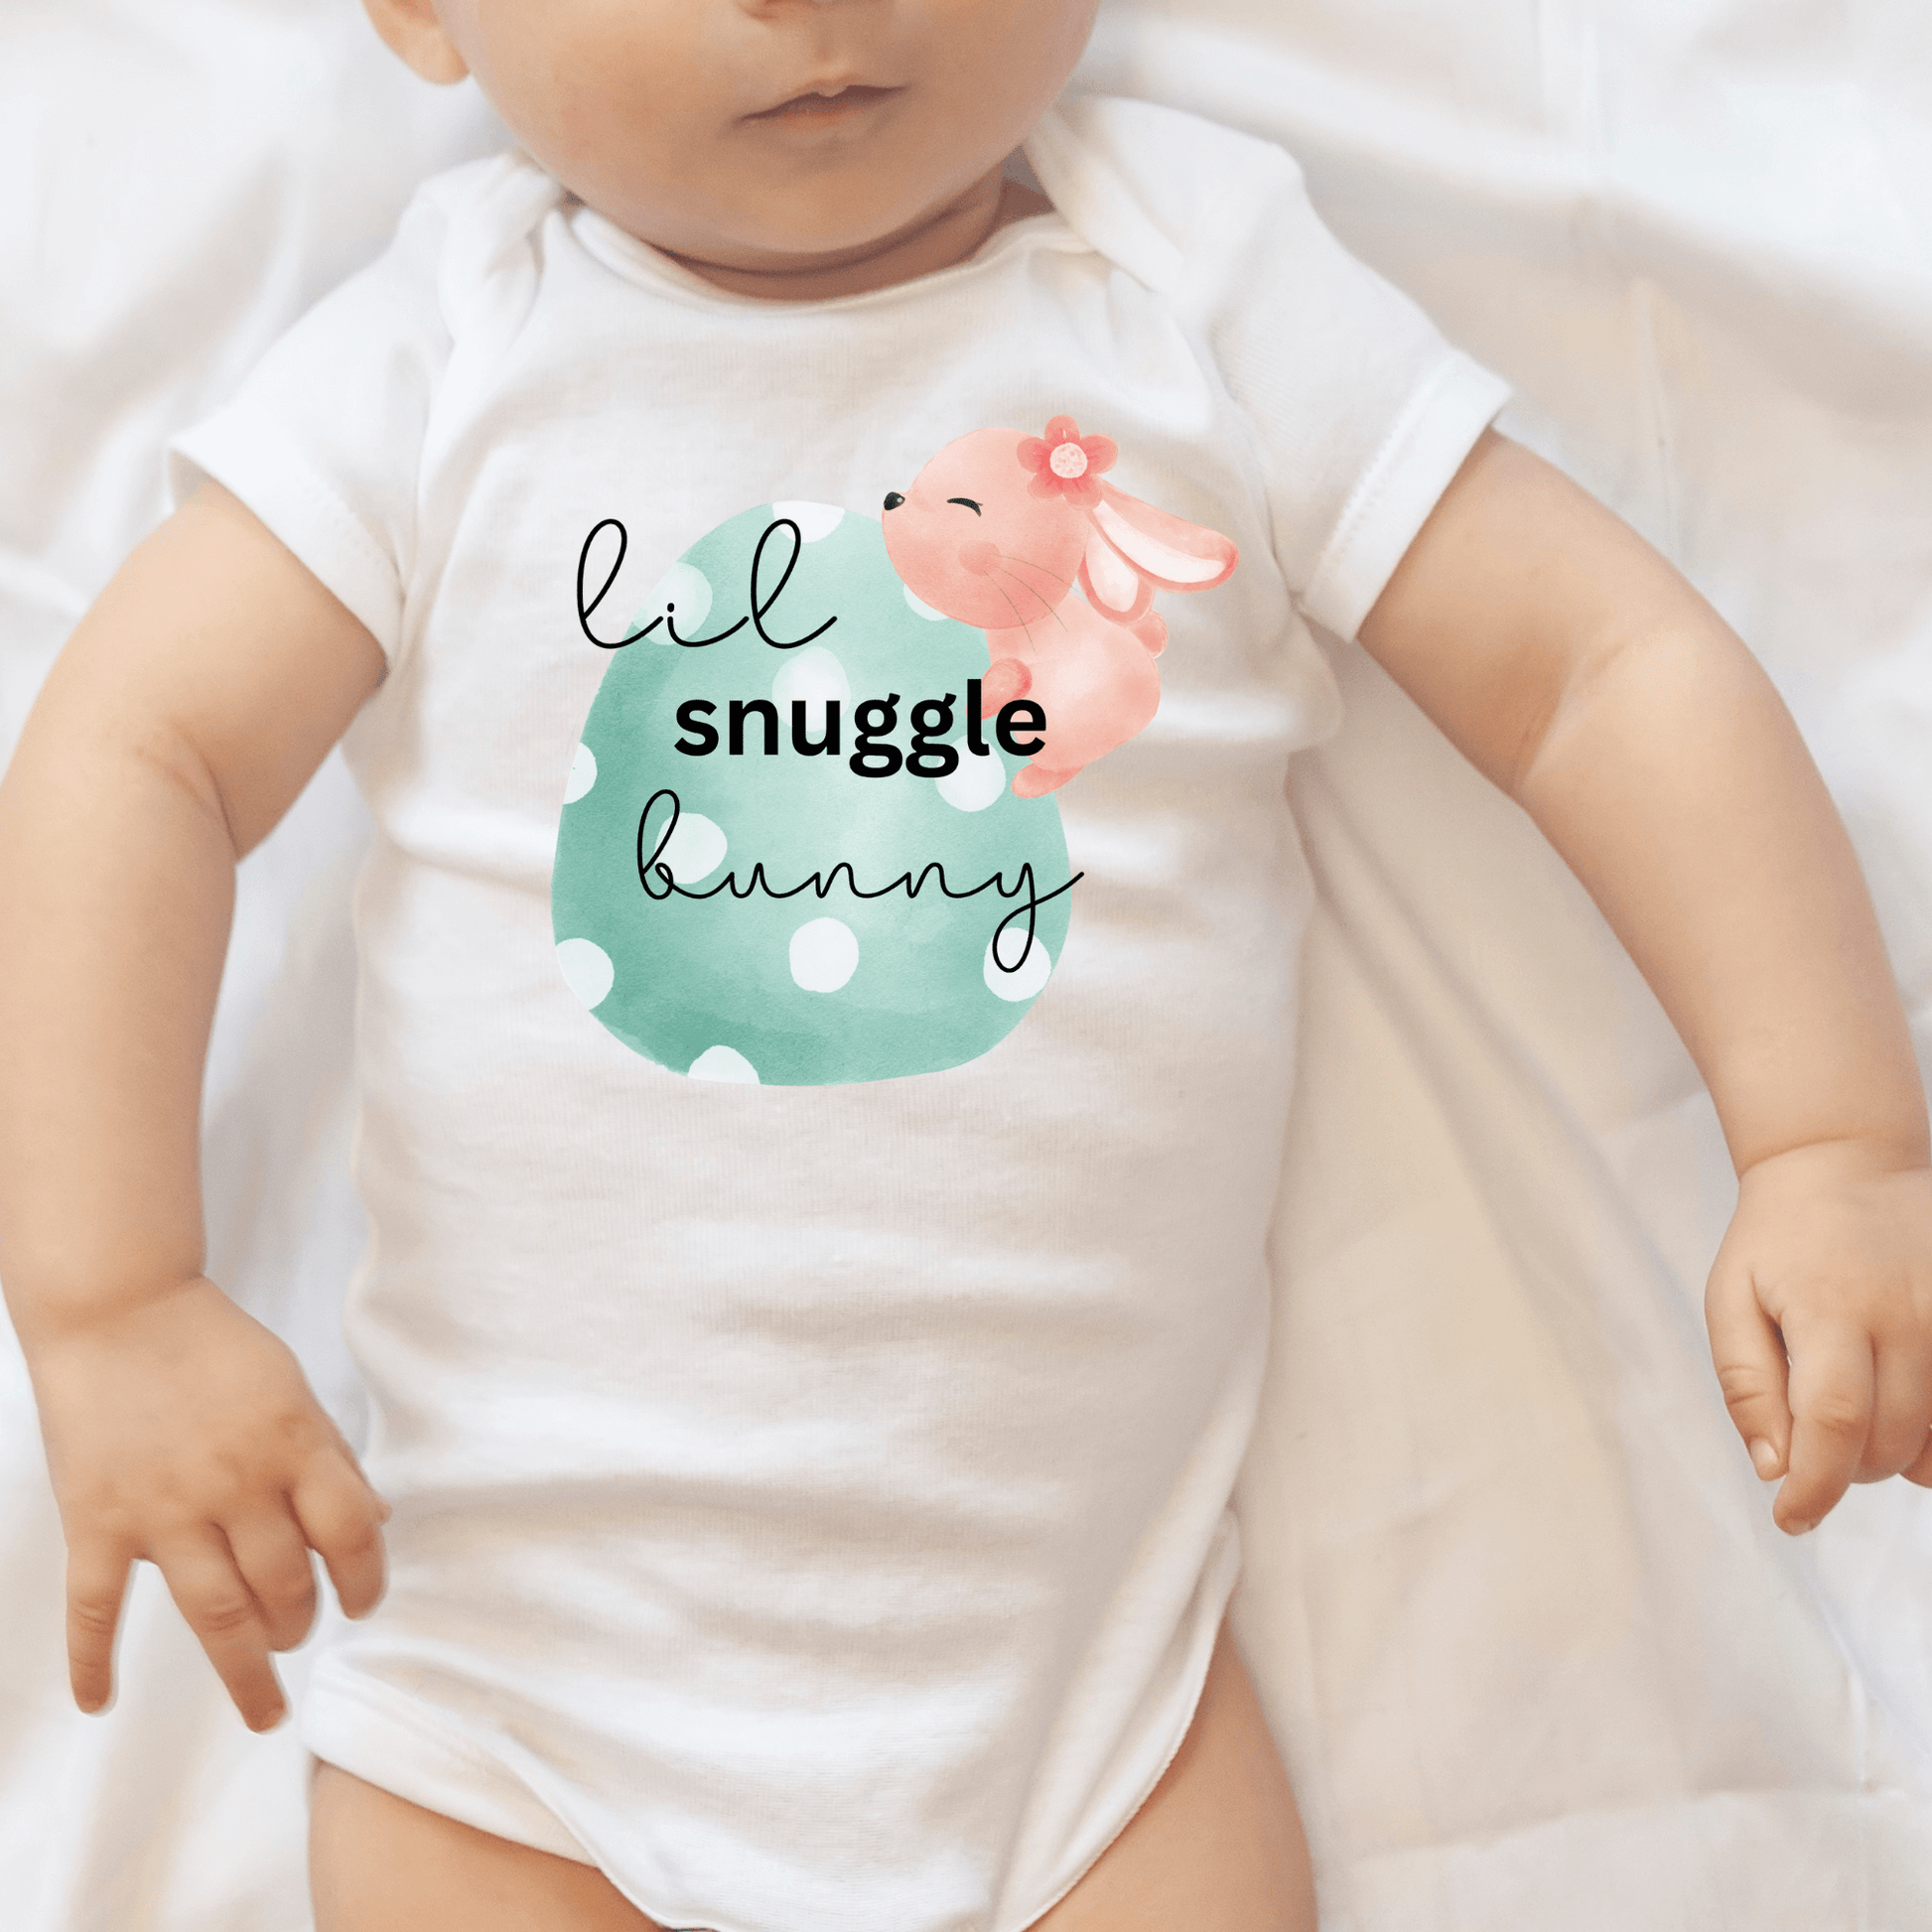 Easter baby outfit, baby toddler clothes, easter Sunday clothing, funny easter outfit, hipster baby easter clothes, spring outfit, white baby